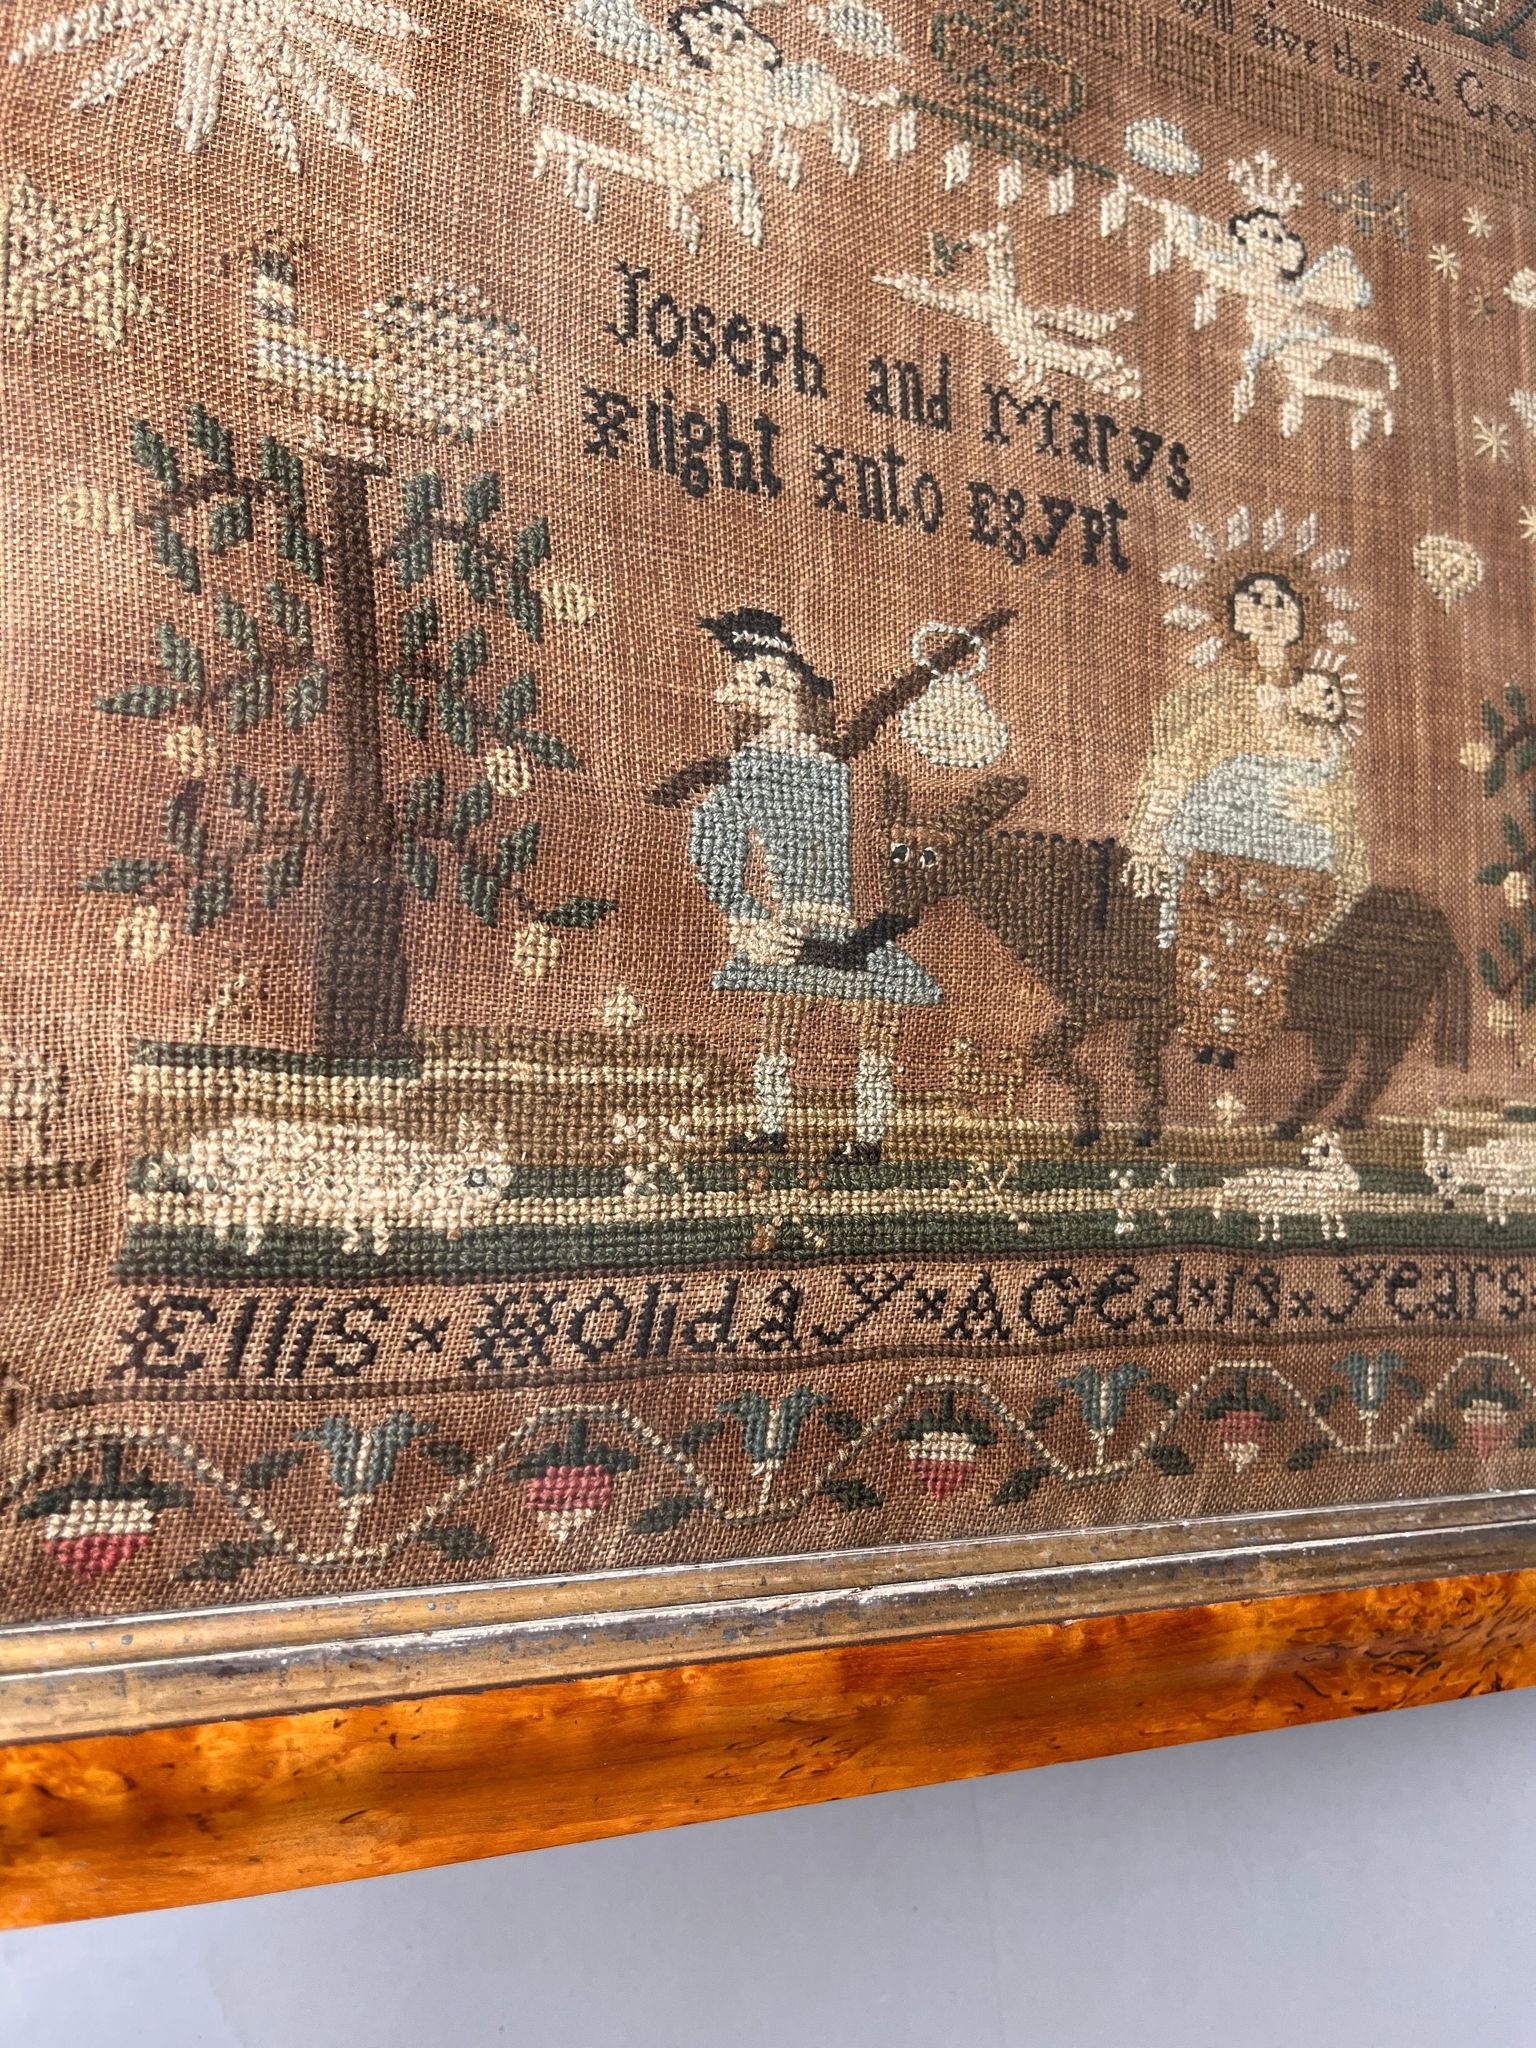 George 111 embroidery sampler of mary & josephs flight to egypt by ellis holiday aged 13 years - Image 6 of 8